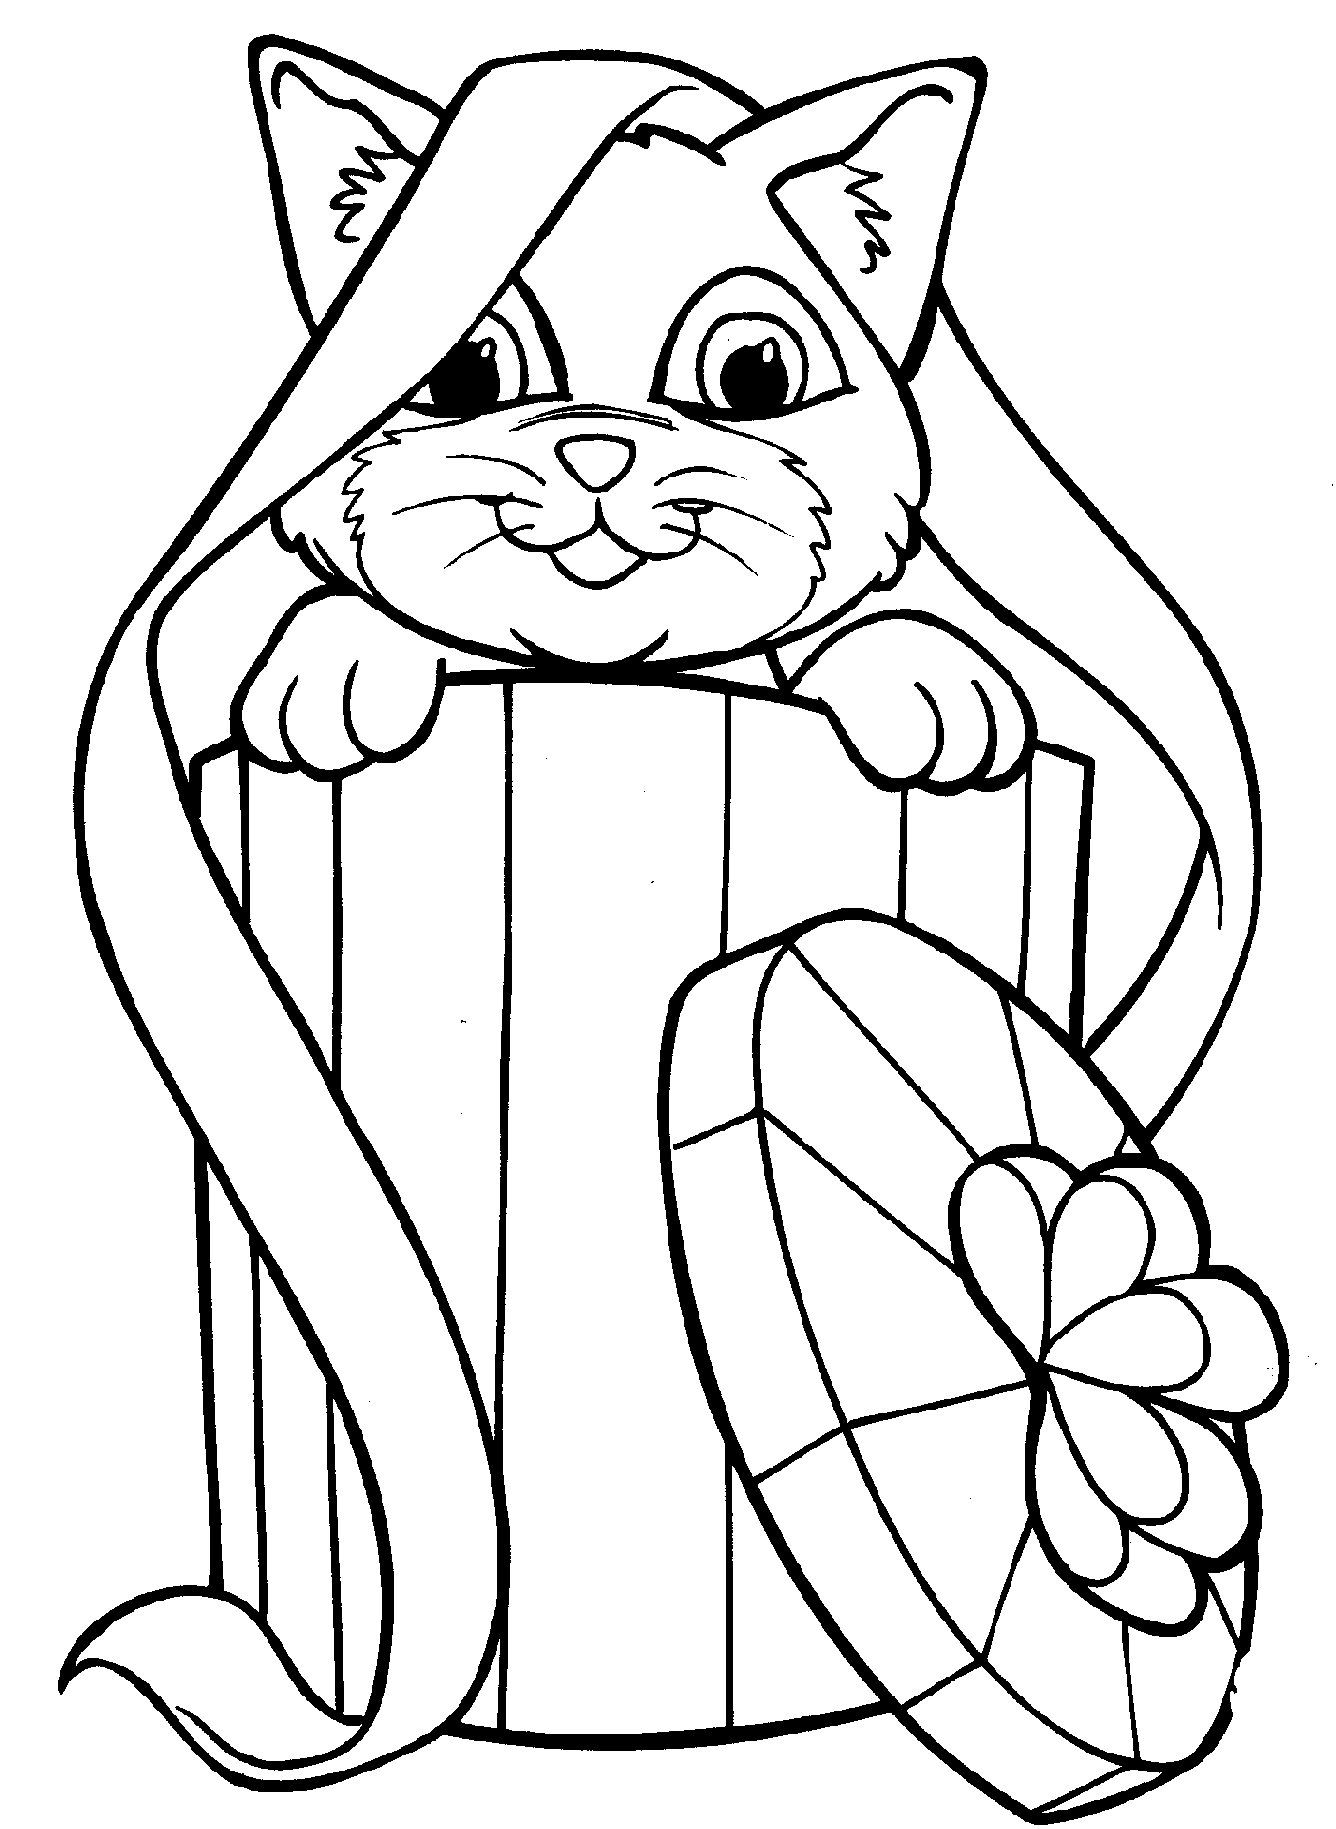 Kitty for Christmas Present Coloring Page